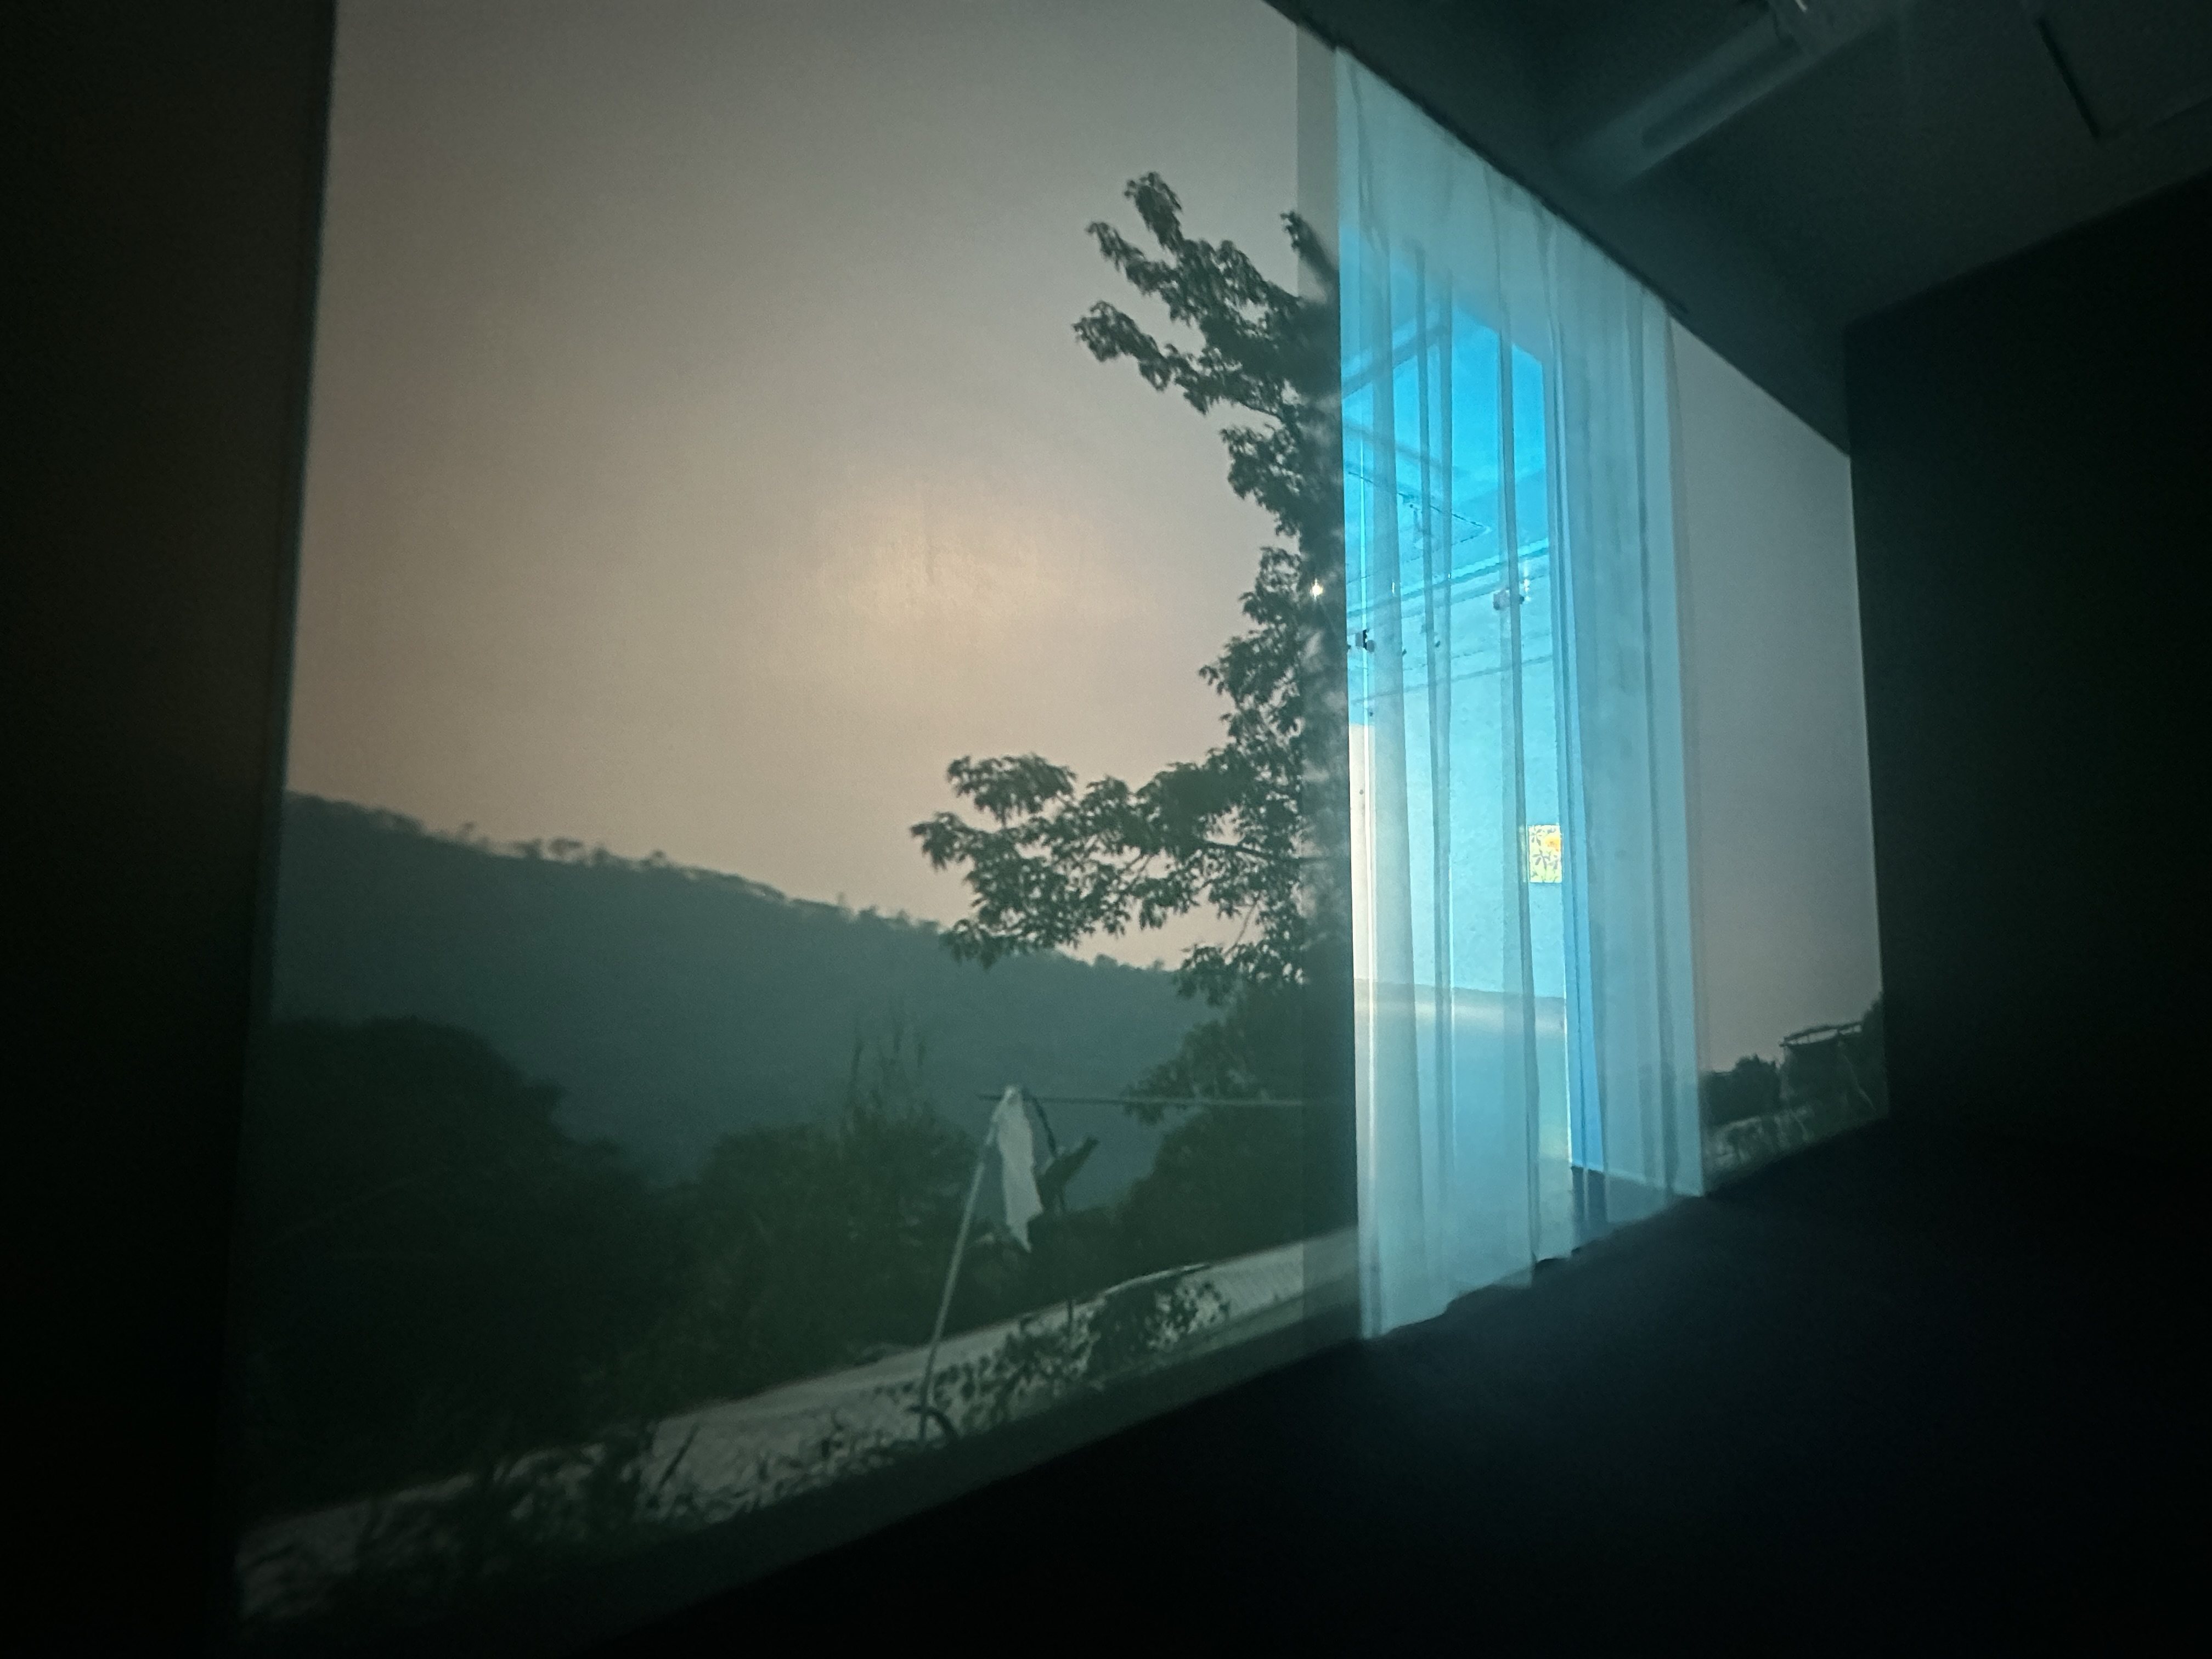 A piece of video art in the Shenzhen exhibition “As Shards of Dawn Shot Through the Dark”, by Natalie Lo Lai-lai. The show is one of two currently running in the Chinese city in which Hong Kong artists explore shared anxieties to show the power of art in connecting people. Photo: Natalie Lo